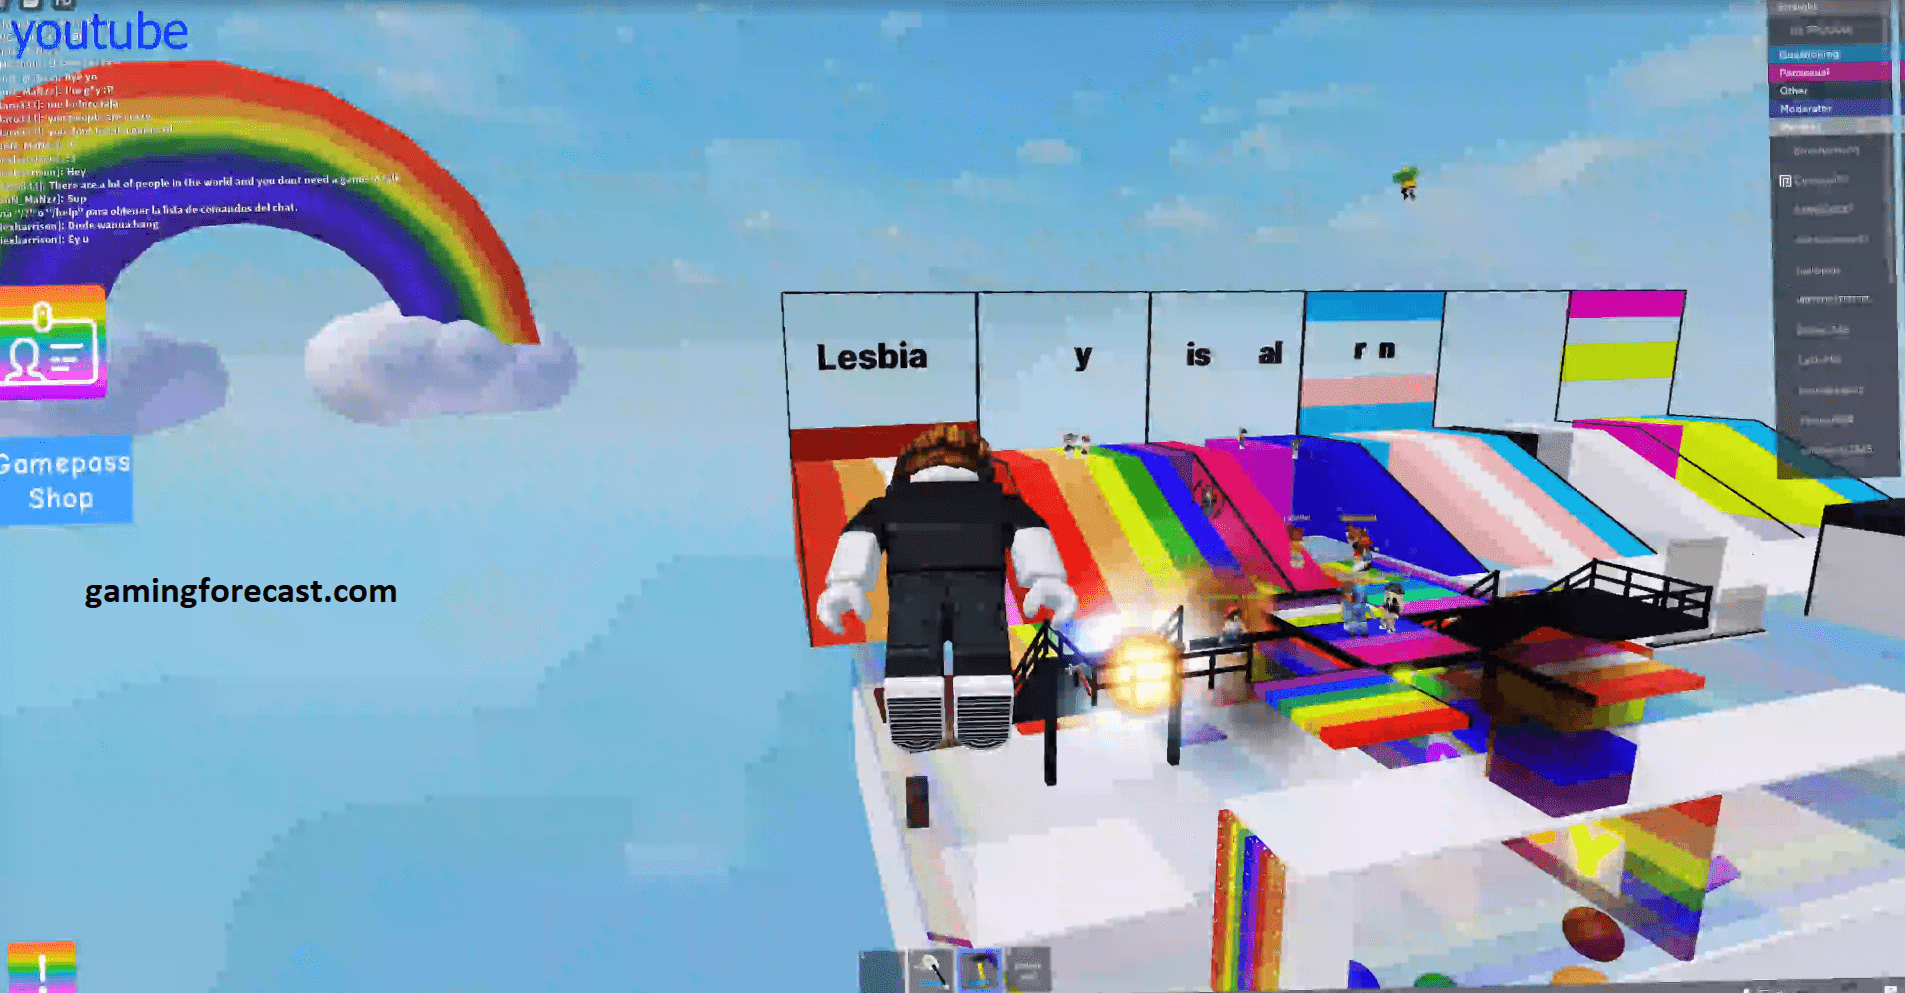 Roblox Hack Download Pc Destroy Lobby Fly Aimbot Scripts 2021 Gaming Forecast Download Free Online Game Hacks - download new exploit hack roblox 2021